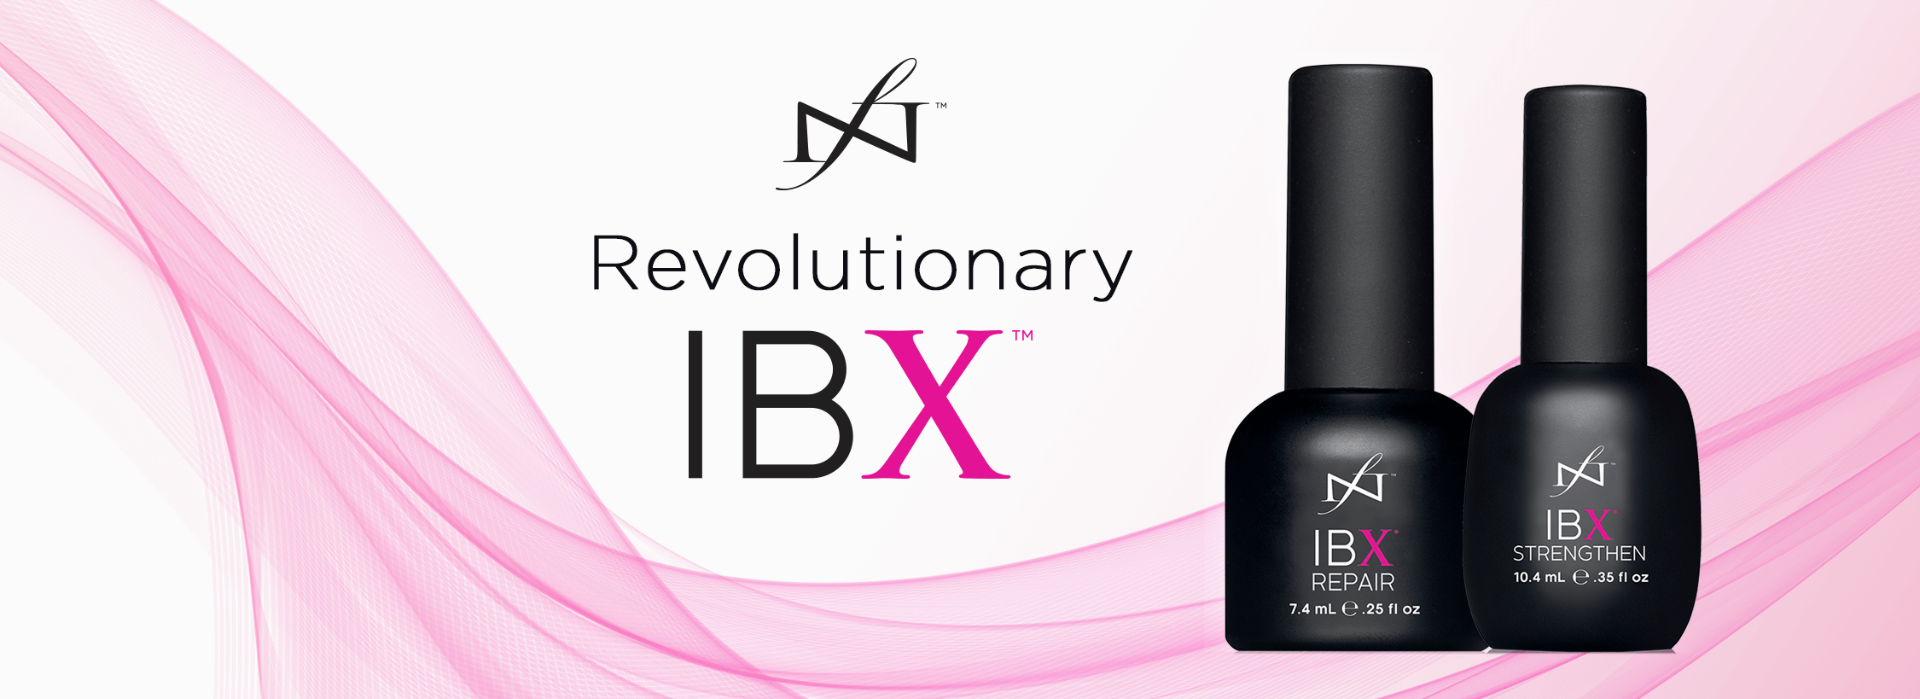 IBX_CATEGORY_BANNER_1_